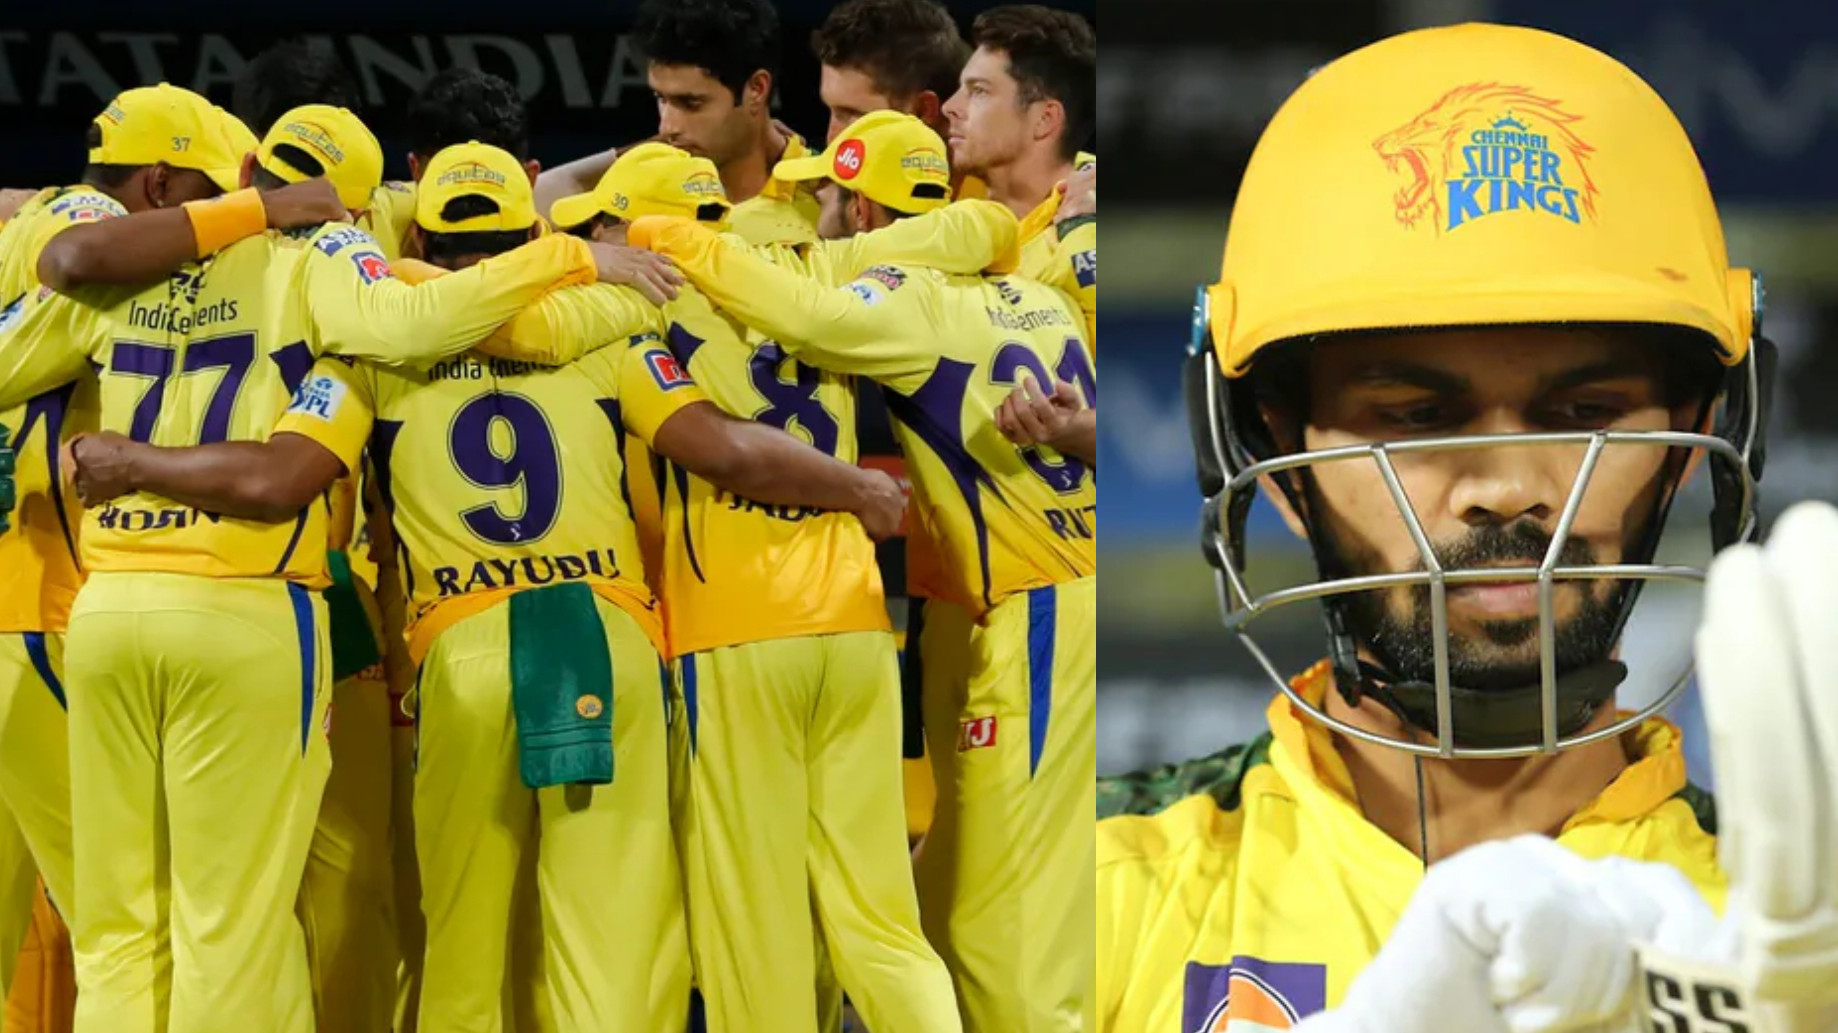 IPL 2022: ‘We did not play to our expectations’- CSK's Ruturaj Gaikwad on defending champions' poor campaign